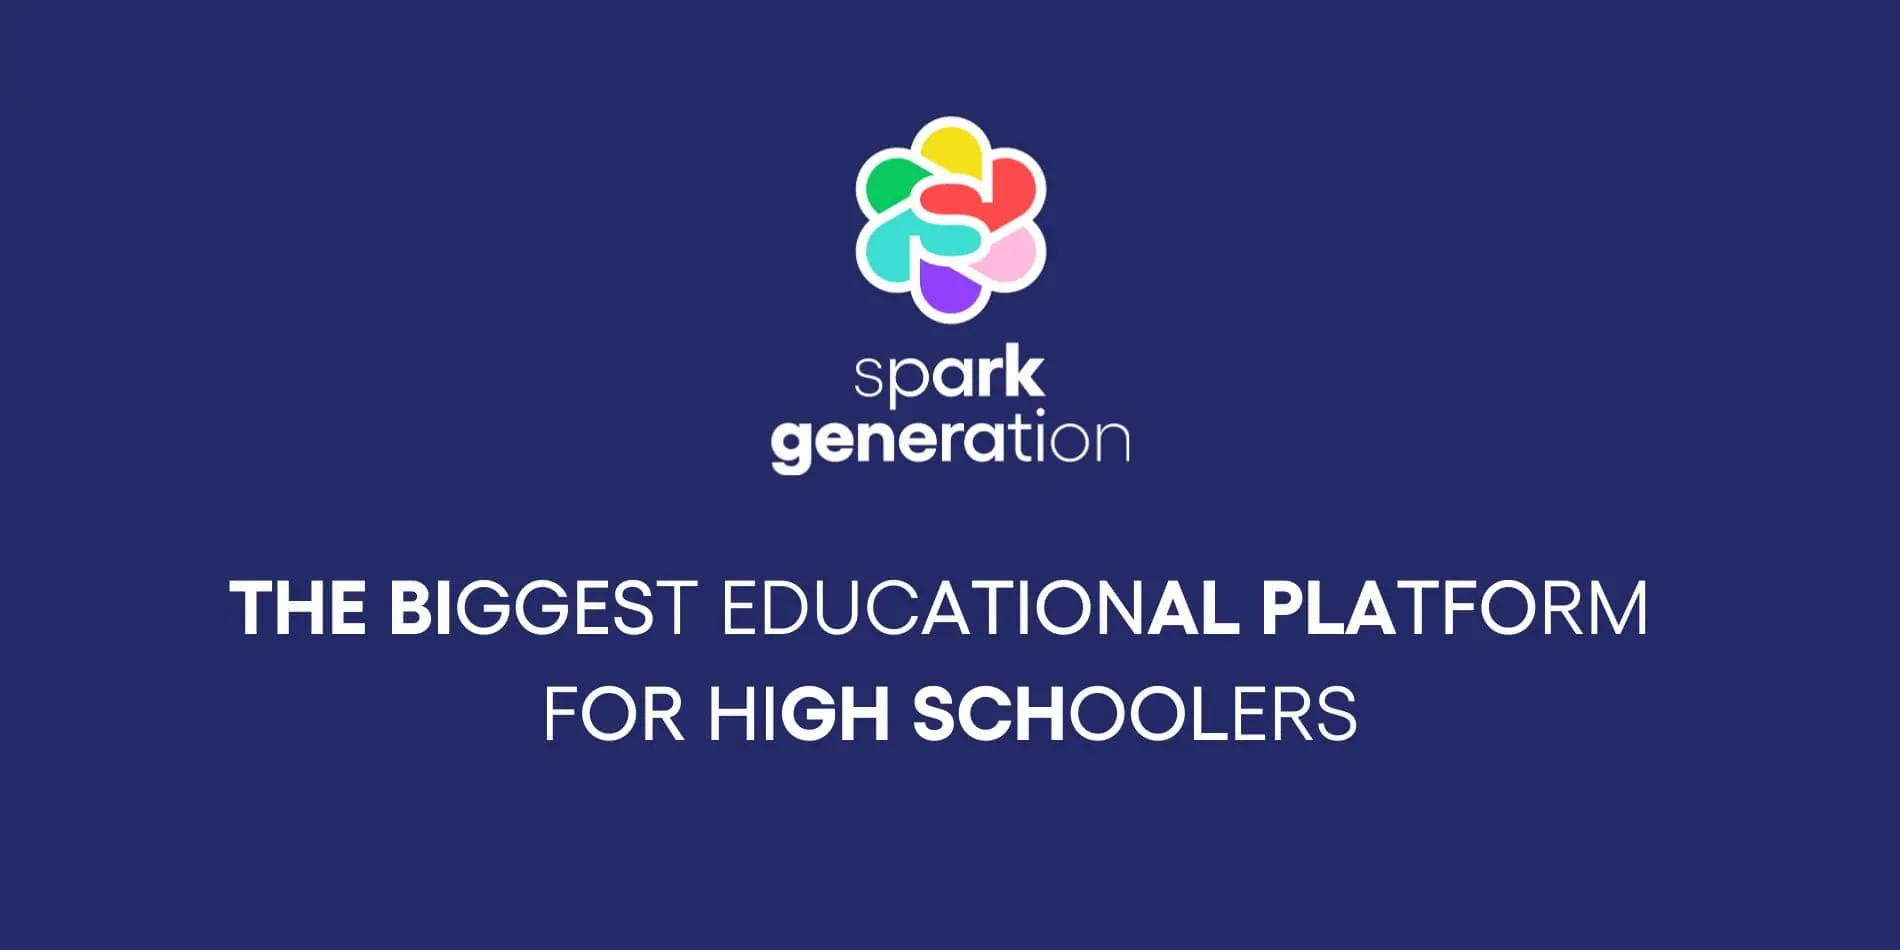 spark-generation-cover-photo spark-generation-cover-photo Spark Generation spark-generation-cover-photo Top 3 British A-Level Online Schools in the World | World Schools